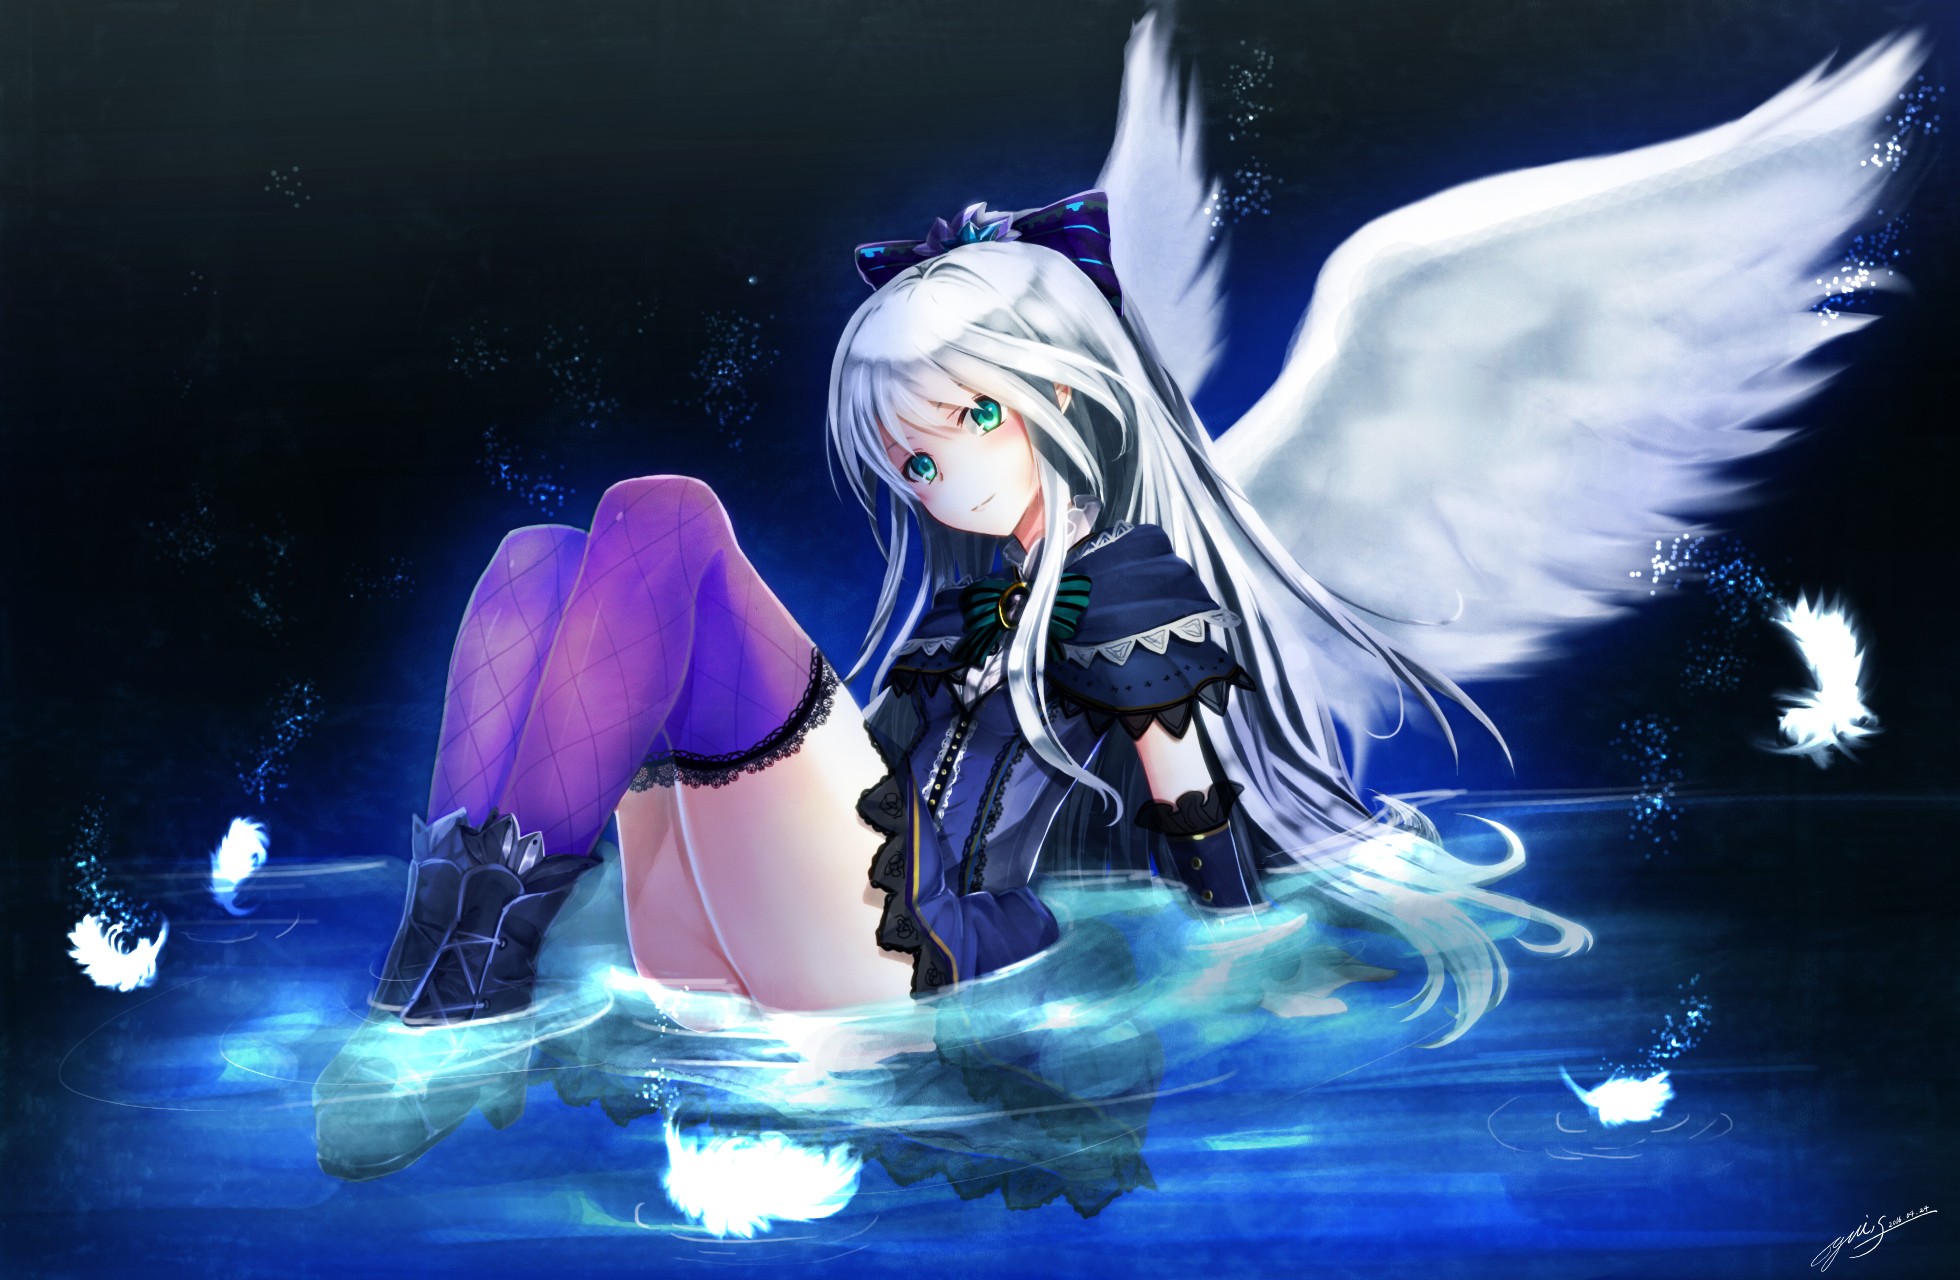 Anime 1960x1280 anime anime girls dress heels wet wings original characters silver hair fantasy art Pixiv fantasy girl aqua eyes thighs together stockings purple stockings boots long hair in water water white hair